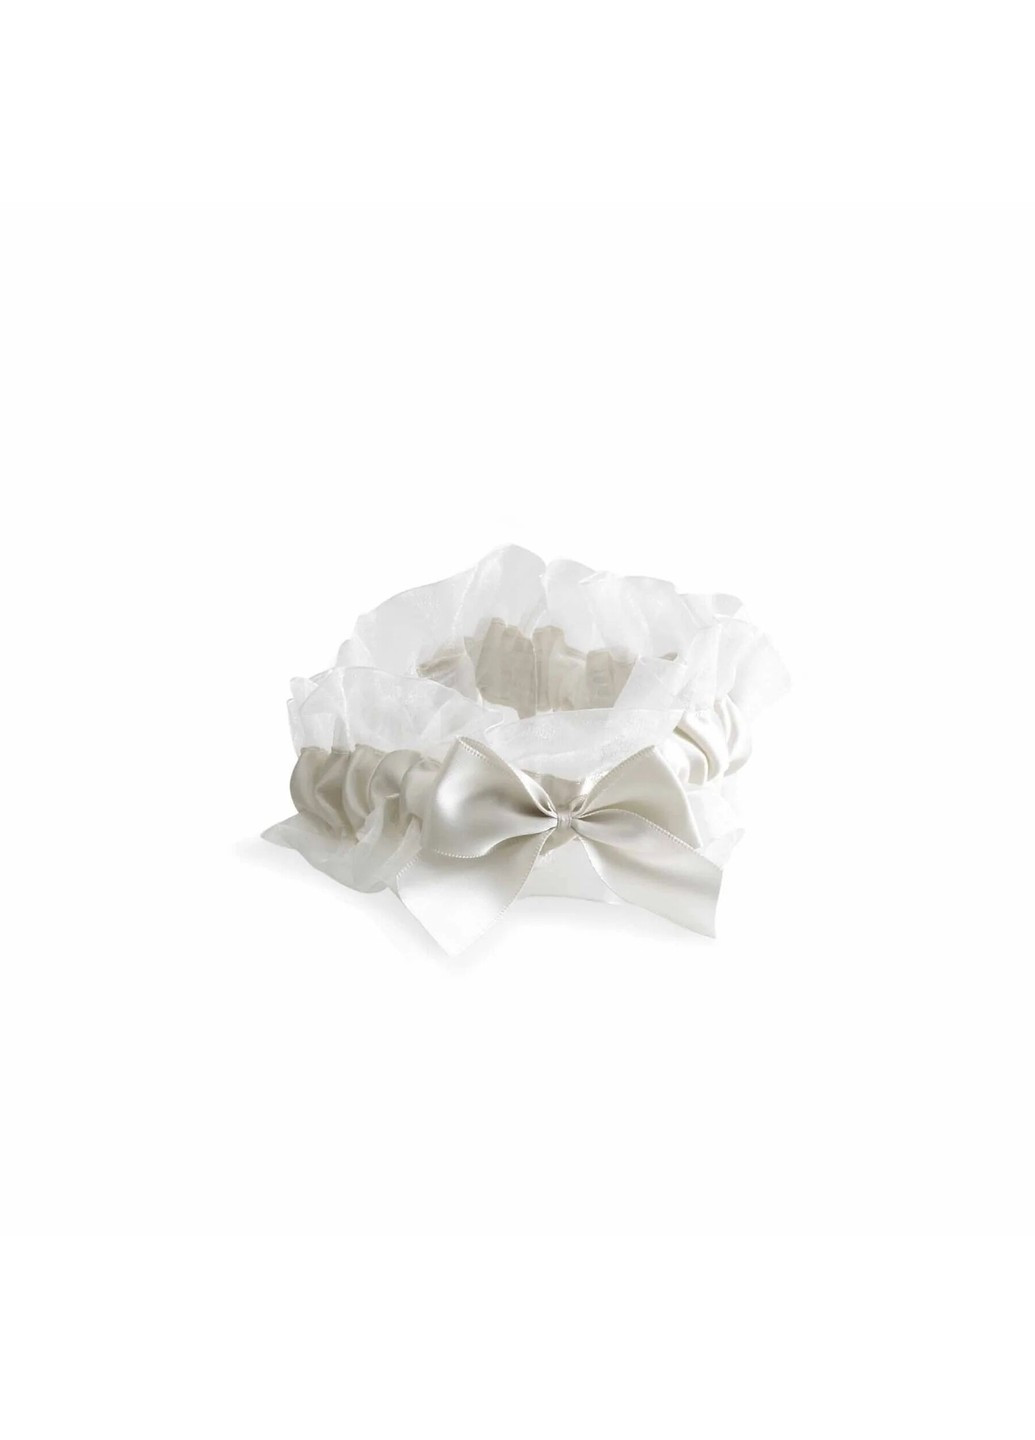 Набор - Happily Ever After - WHITE LABEL Bijoux Indiscrets (277237289)